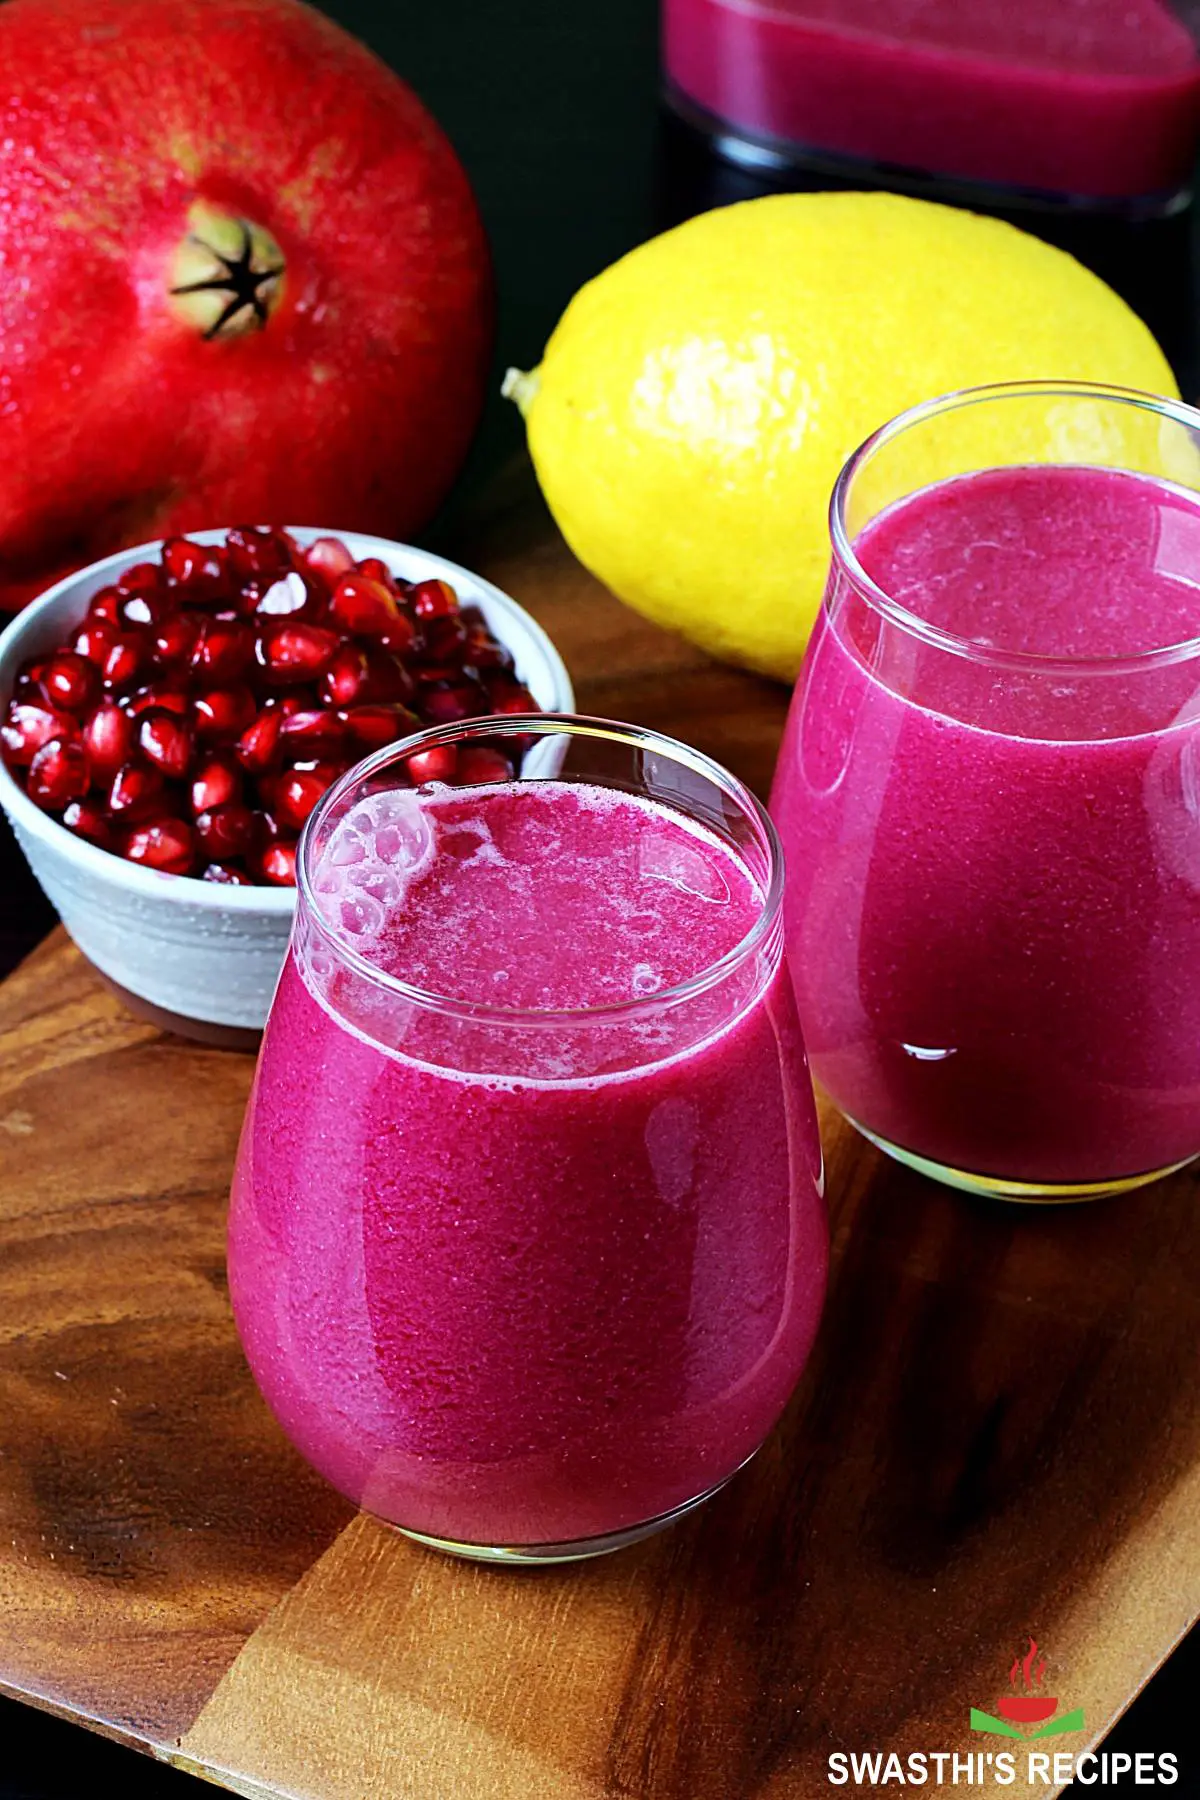 9 foods you should never put in a juicer